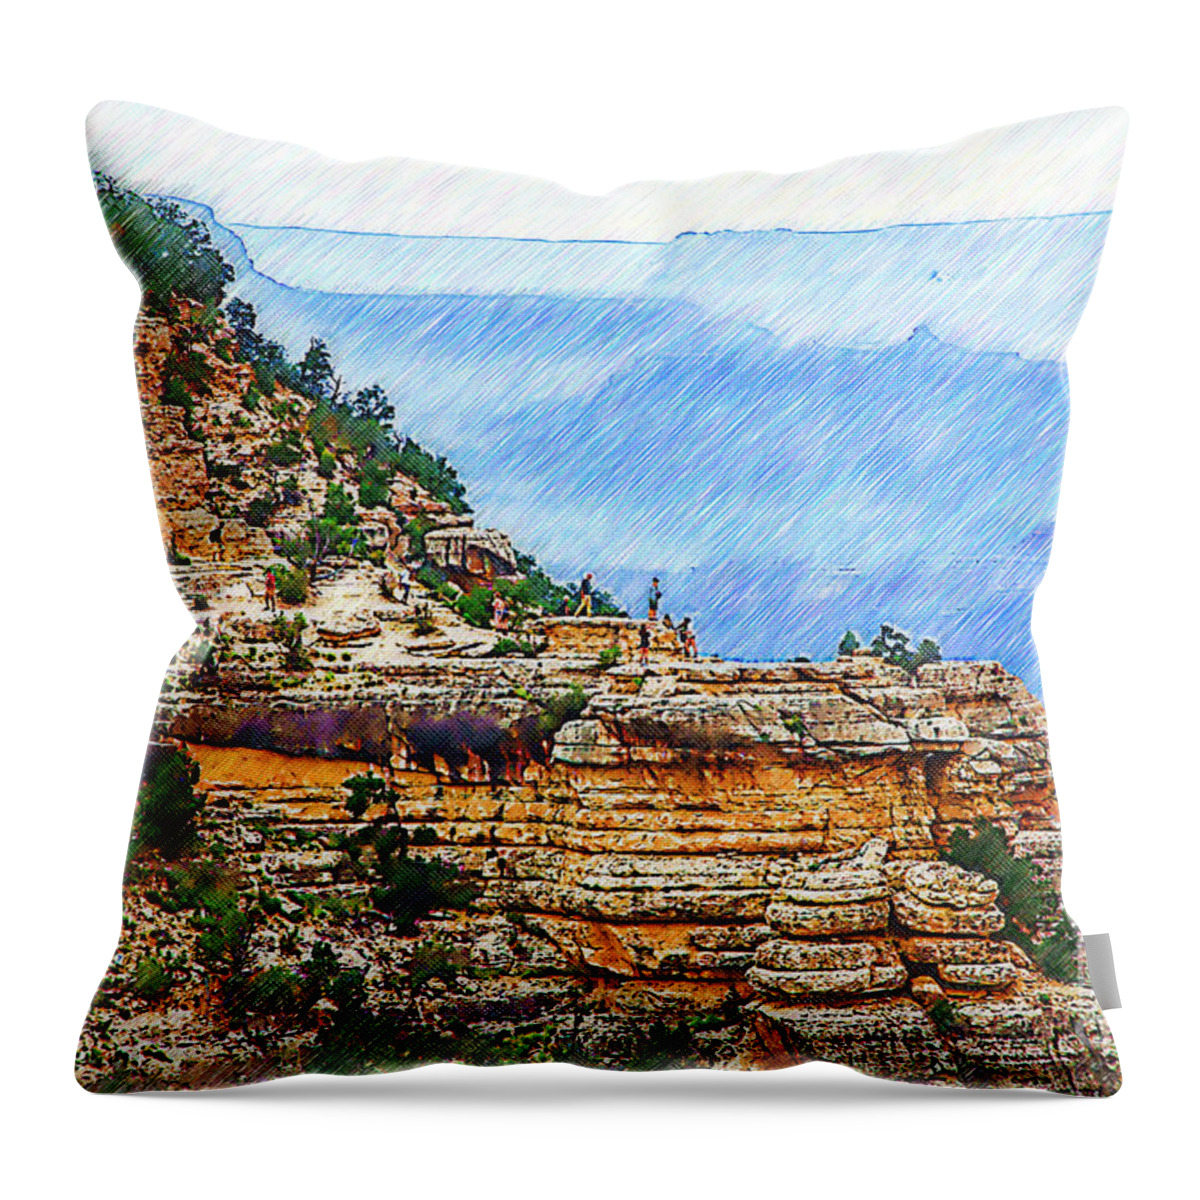 Grand Canyon Throw Pillow featuring the digital art Grand Canyon Overlook Sketched by Kirt Tisdale